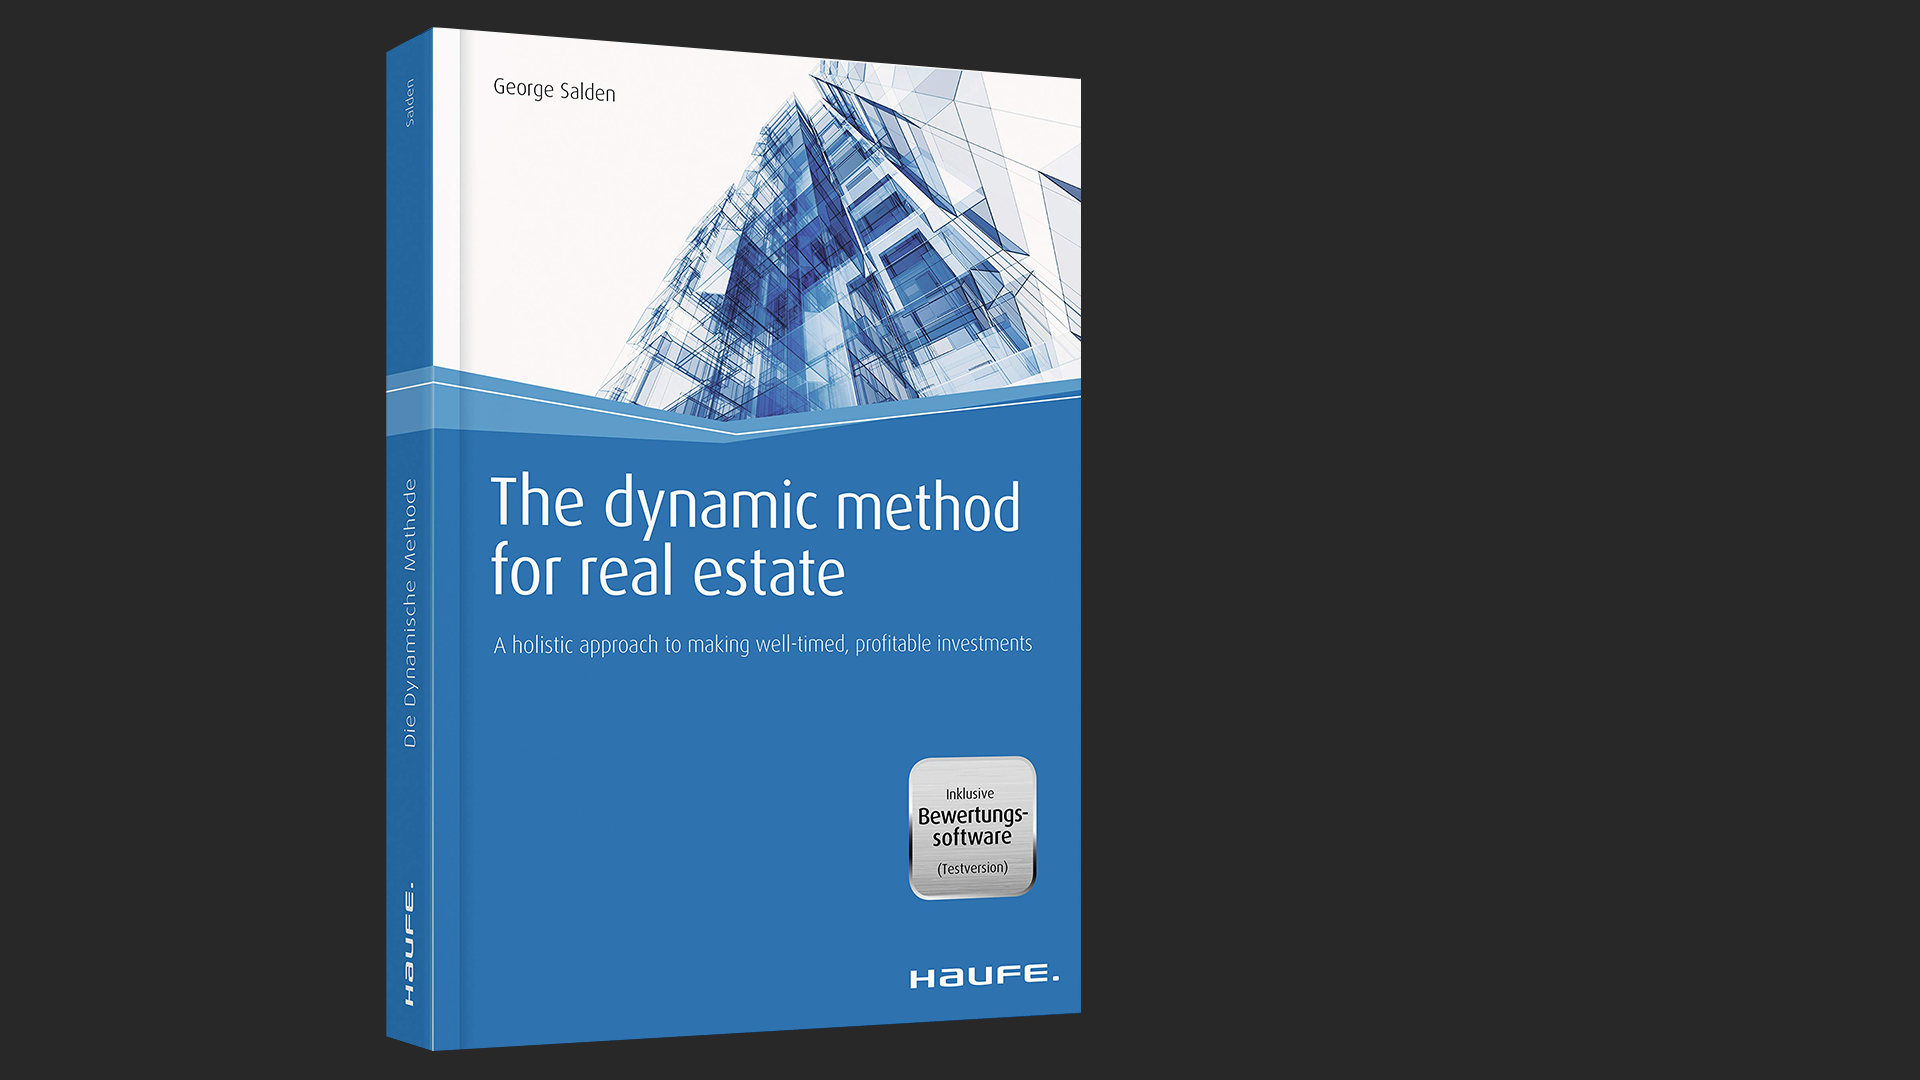 The Dynamic Method for real estate available worldwide on Amazon.